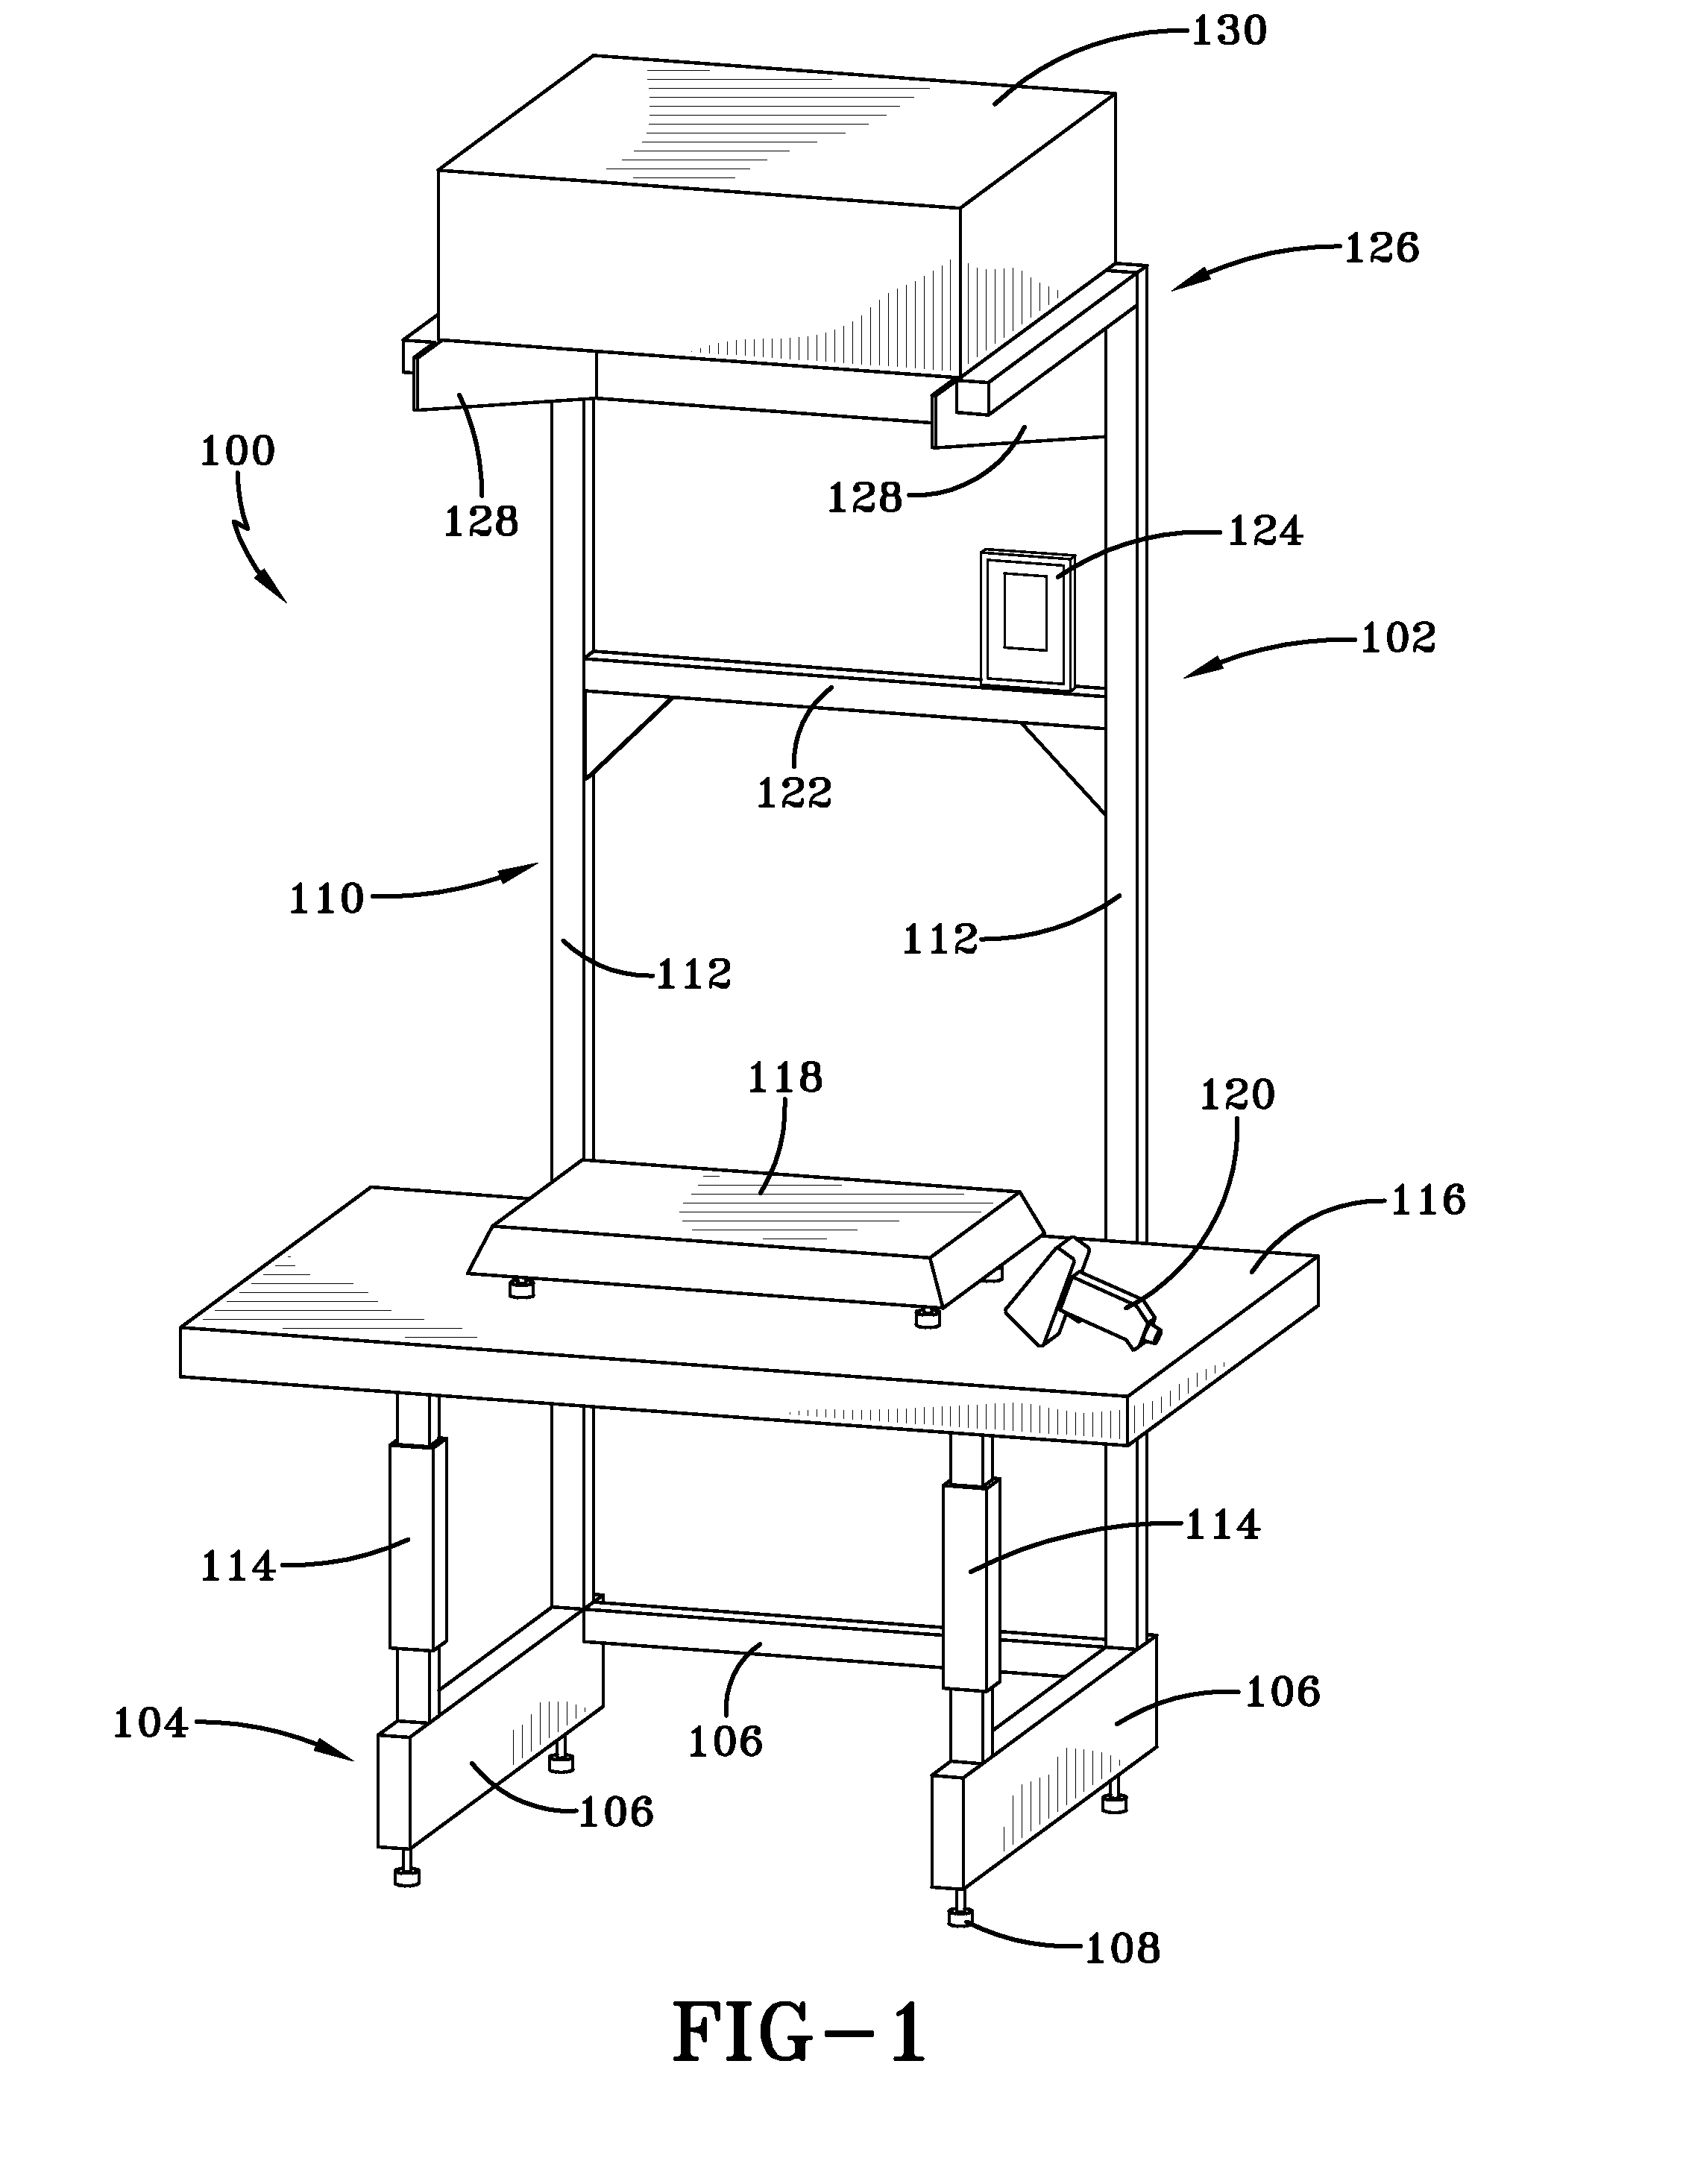 Weighing and dimensioning system and method for weighing and dimensioning